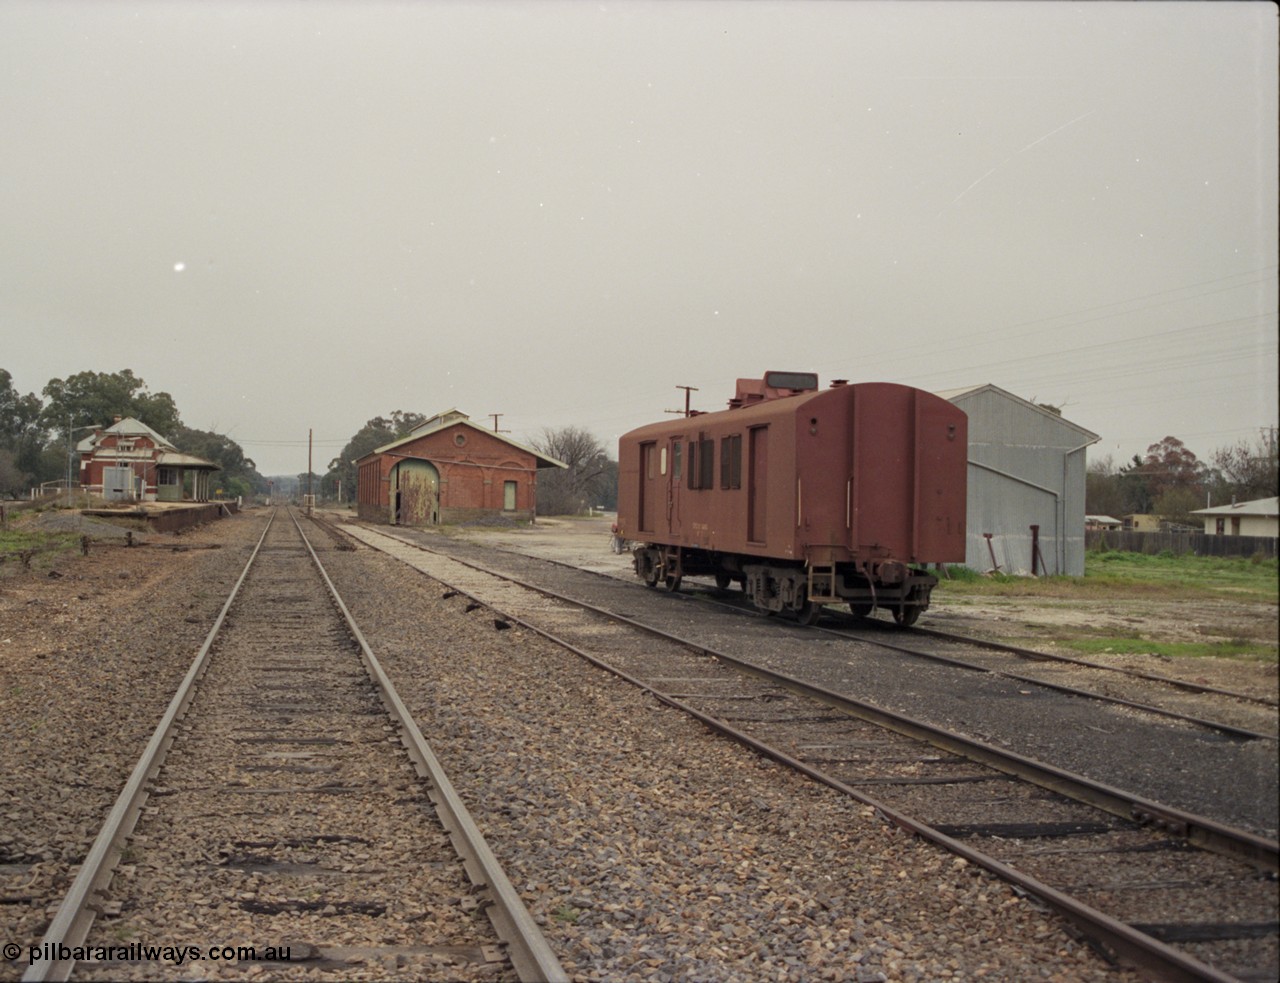 142-2-06
Barnawartha station yard overview, platform or No.1 Road removed, station building, goods shed, VZDY type bogie departmental waggon VZDY 25 'Cyclic Gang No. 1' and super phosphate shed. VZDY 25 was built at Bendigo Workshops in June 1972 as a ZF type van, converted in December 1984 to VZDY.
Keywords: VZDY-type;VZDY25;Victorian-Railways-Bendigo-WS;ZF-van;